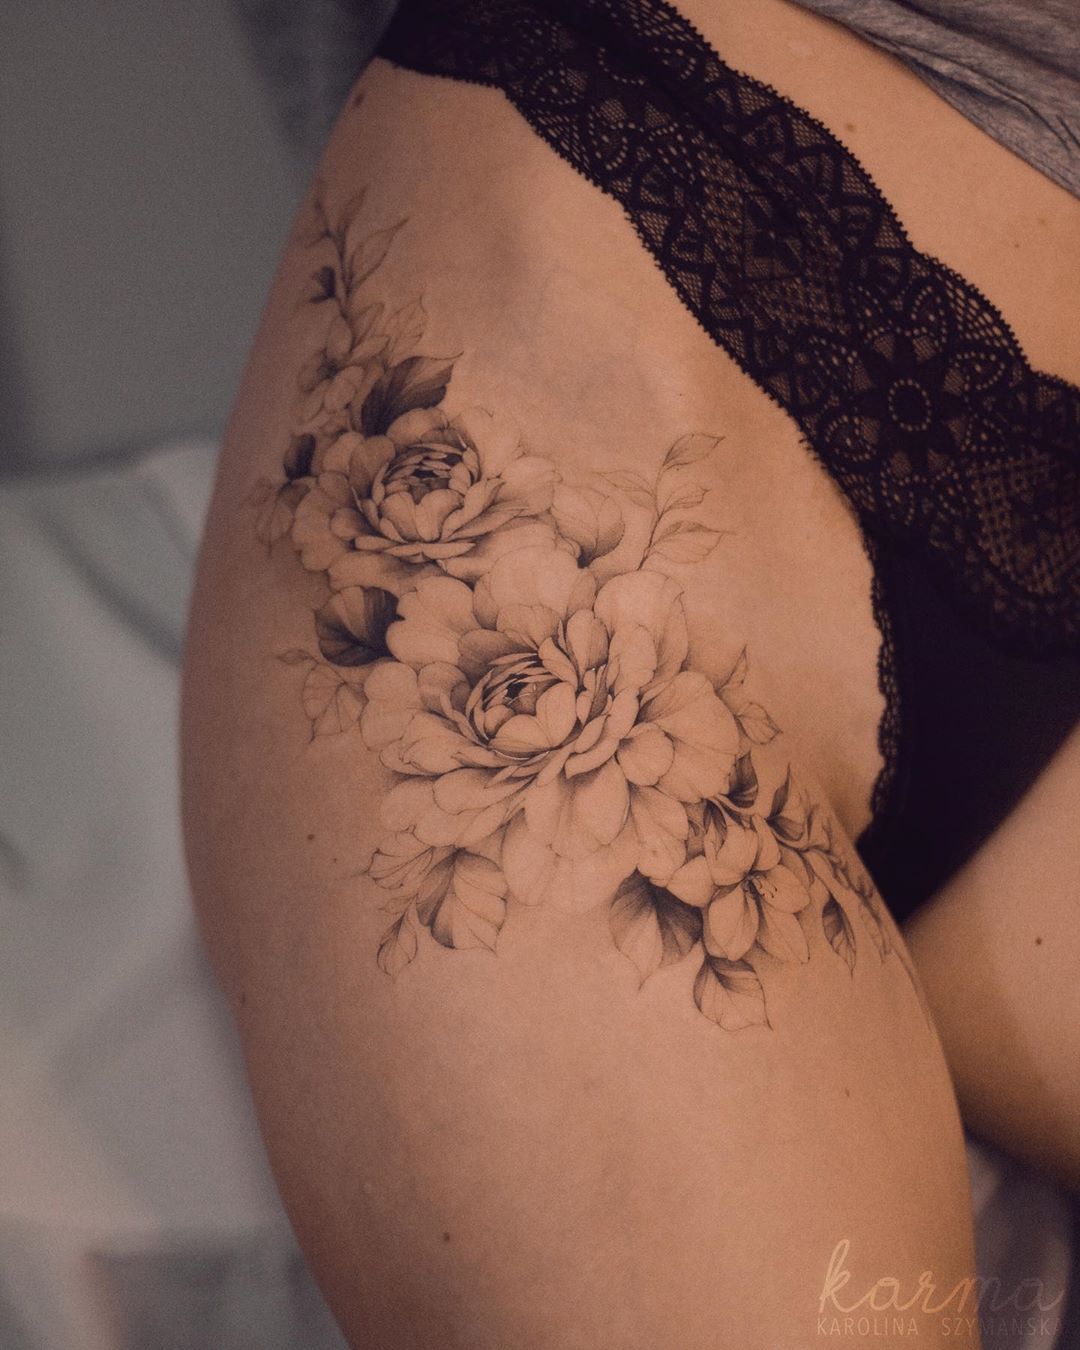 Delicate flower tattoos from the Arctic by Maria Shipulina  iNKPPL